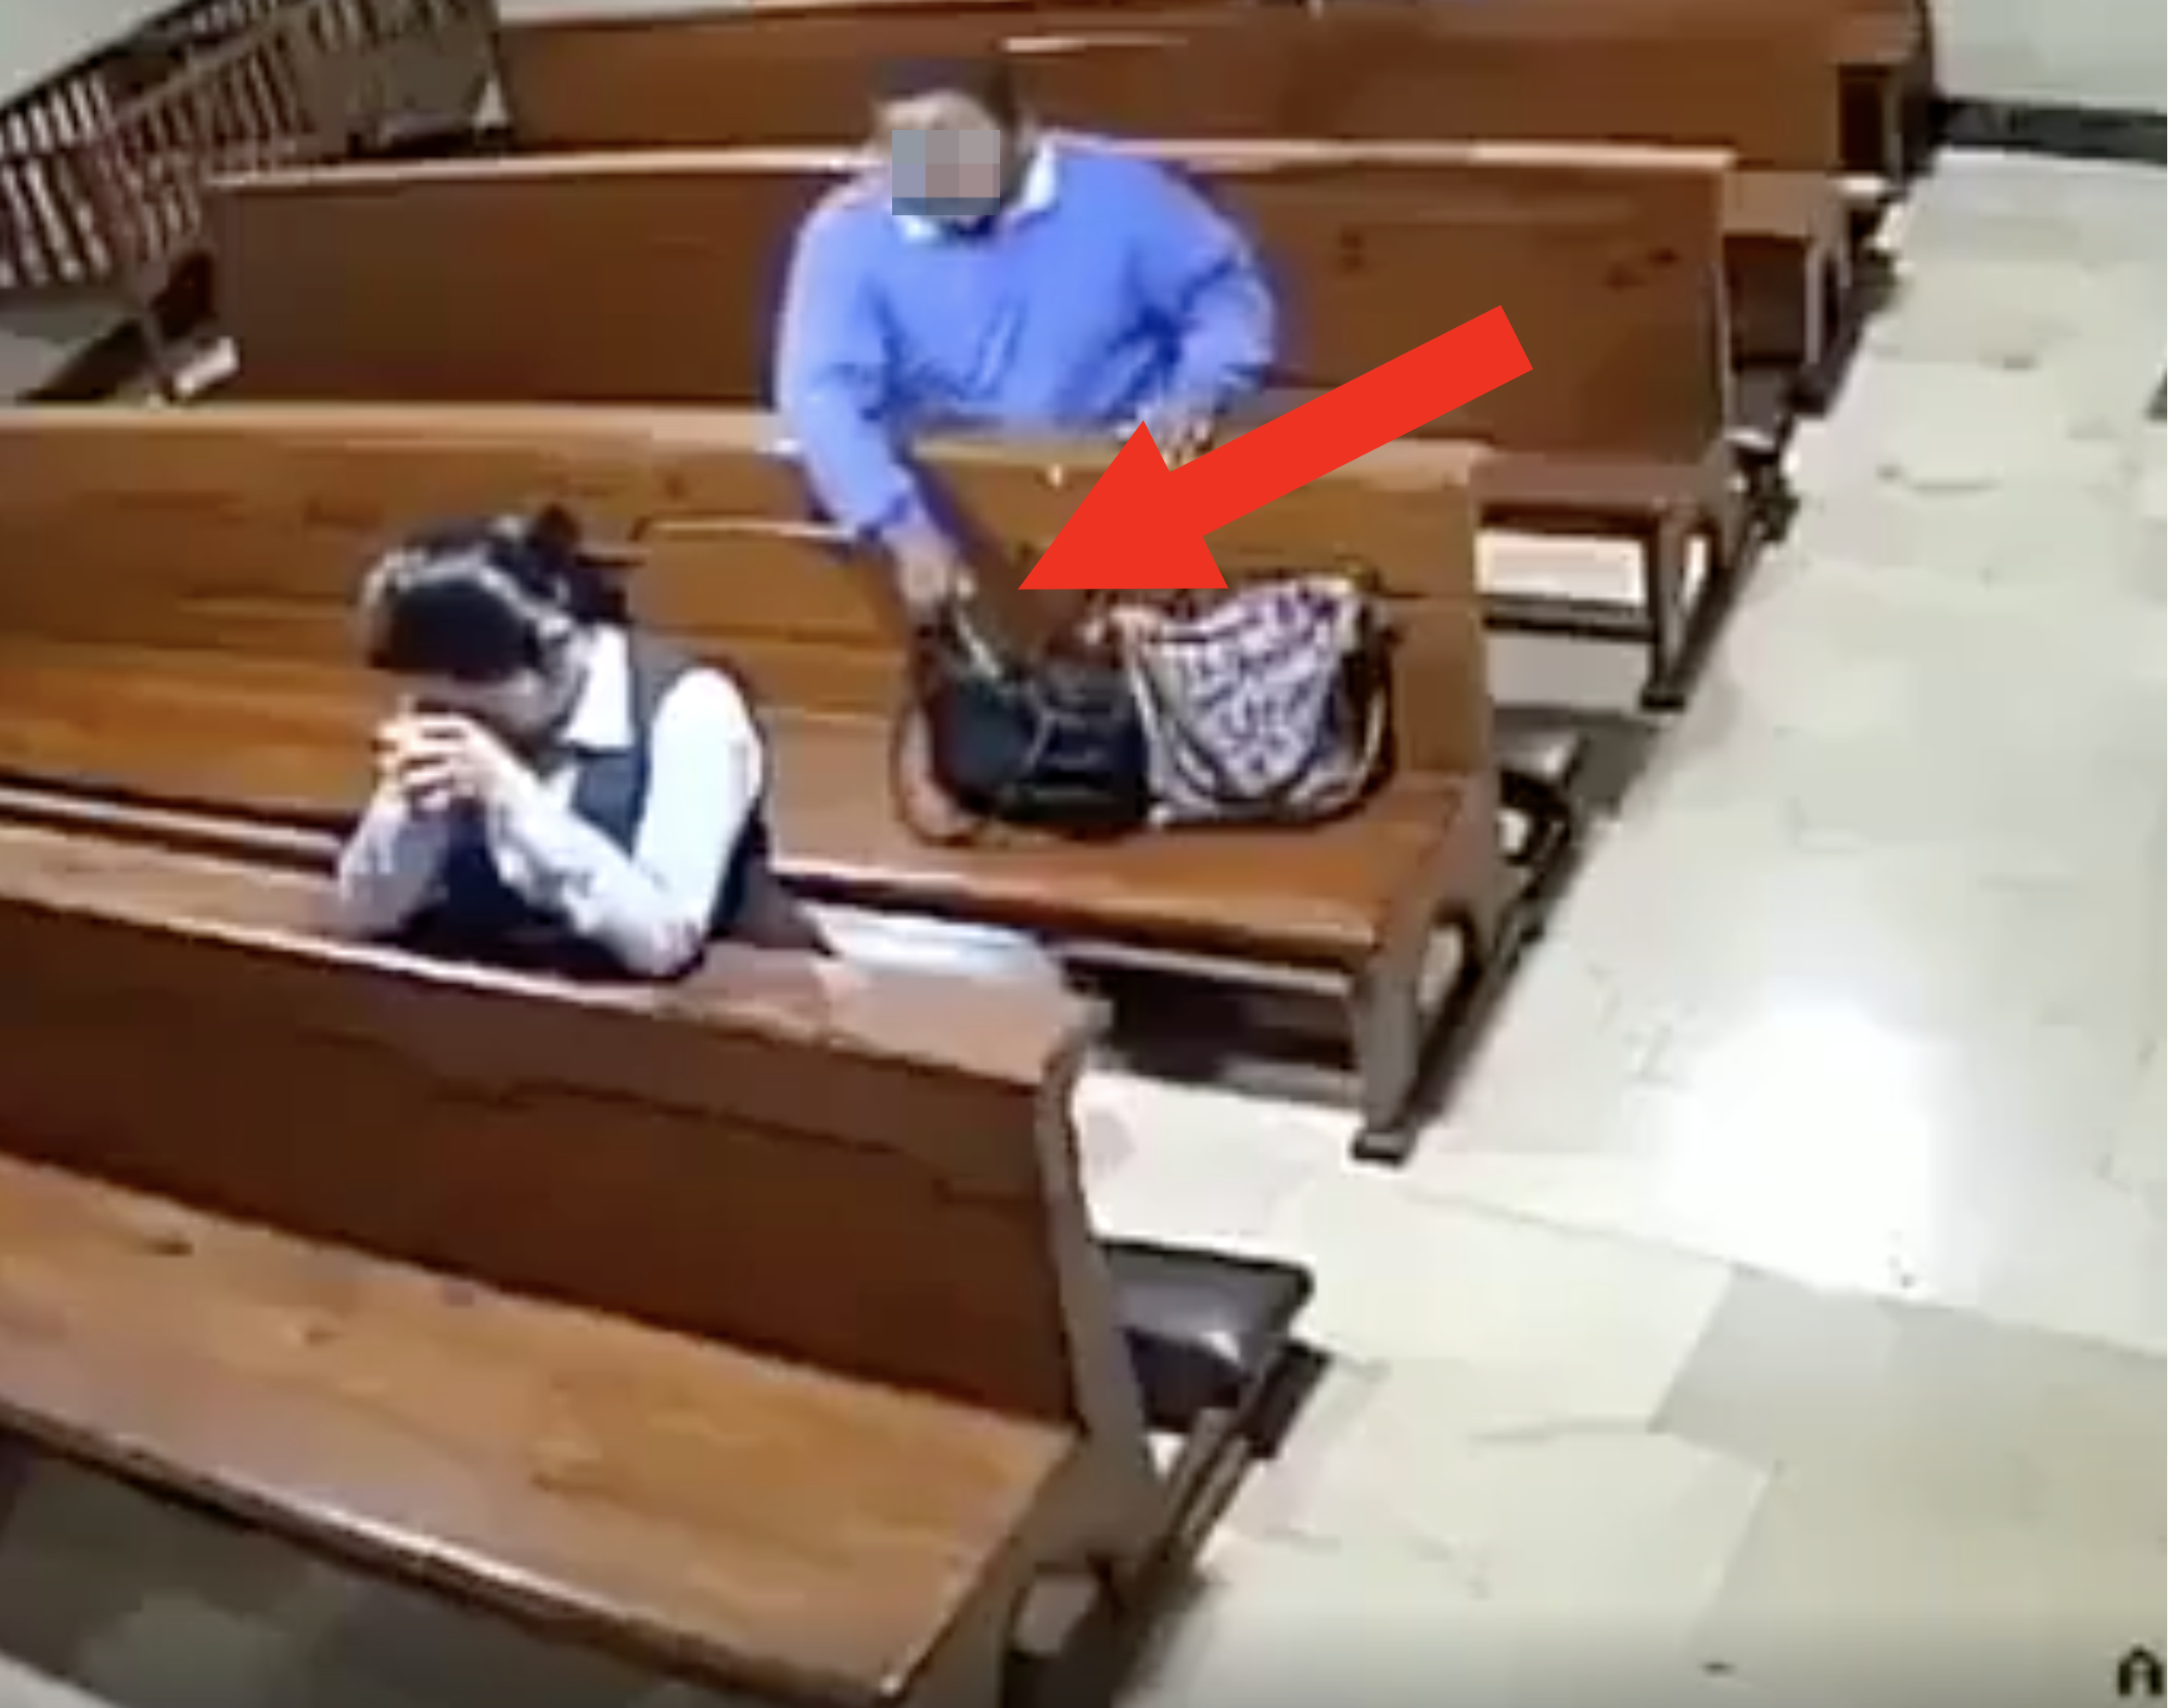 Two people sitting apart on church pews, one appears distressed with head in hands while the man steals something from her purse